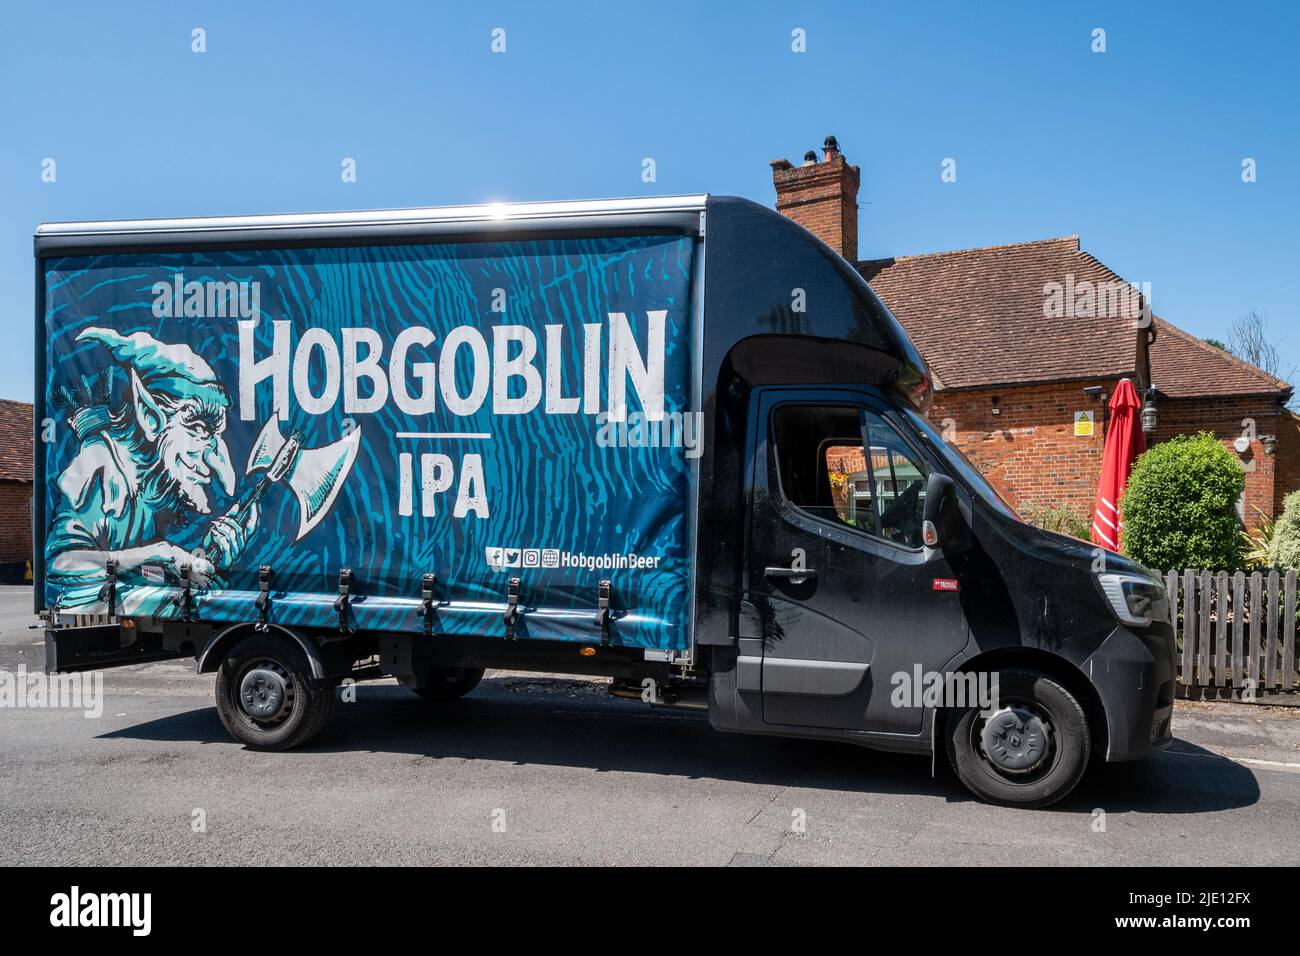 Hobgoblin IPA van delivering beer from Wychwood Brewery to a pub in Surrey, England, UK Stock Photo